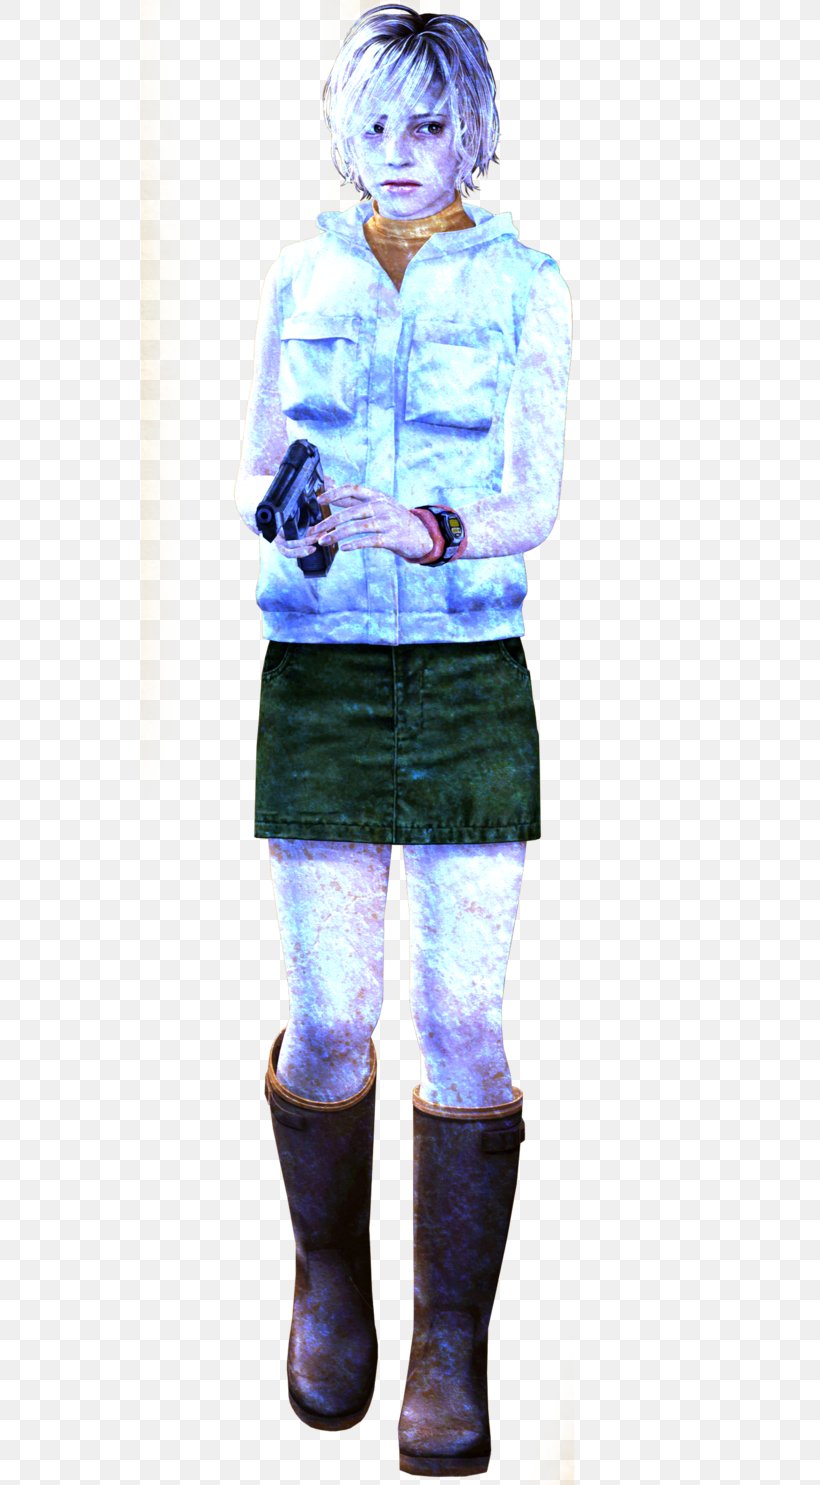 Silent Hill 3 Heather Mason Alessa Gillespie Video Game, PNG, 537x1485px, Silent Hill 3, Aglaophotis, Alessa Gillespie, Character, Costume Download Free